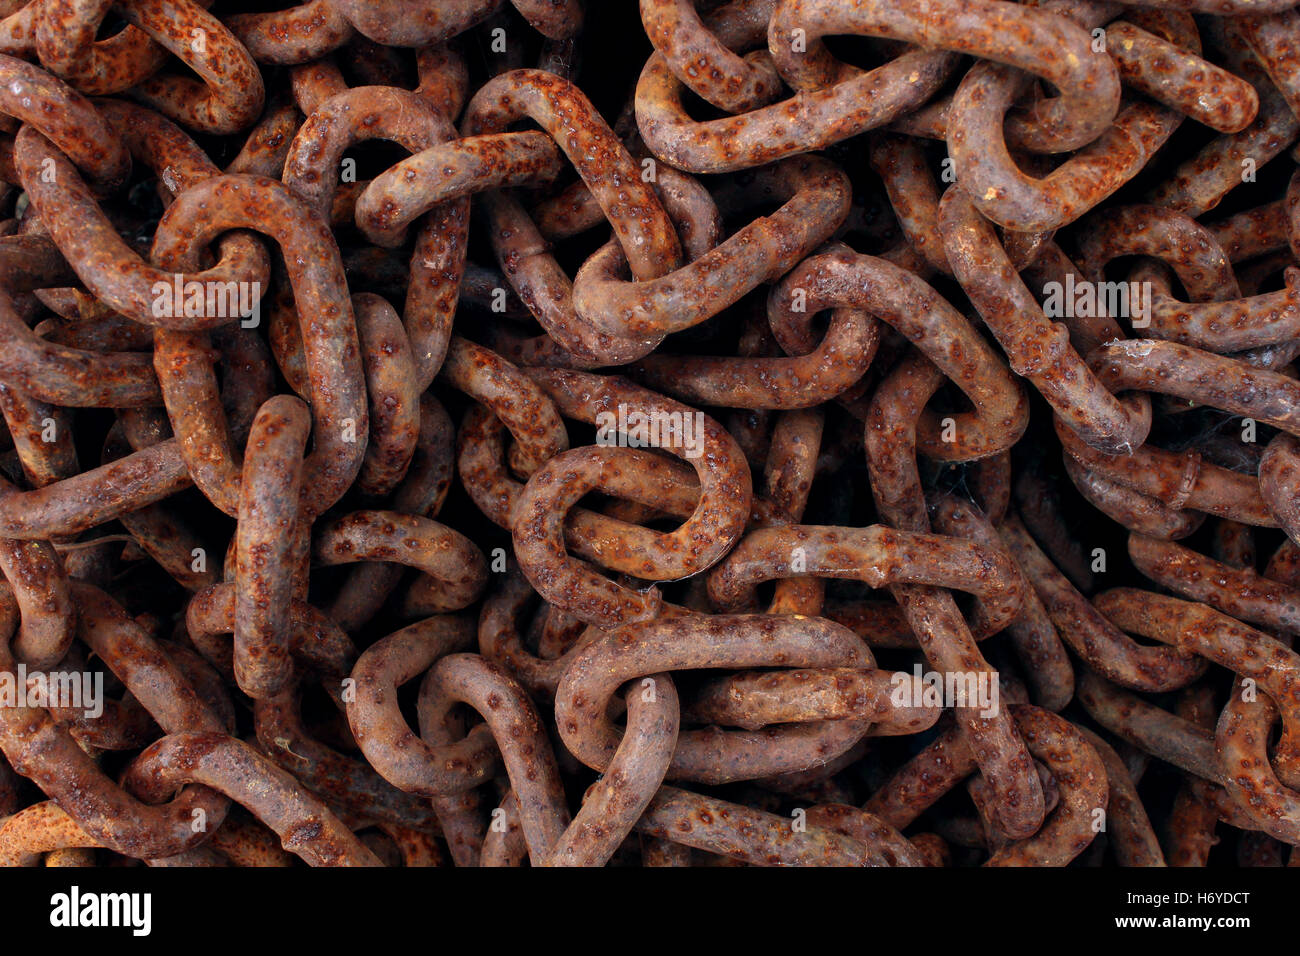 Rusted old iron chains background as a stack of oxidized decaying metal links as an abstract symbol of industrial aging or corrosion. Stock Photo